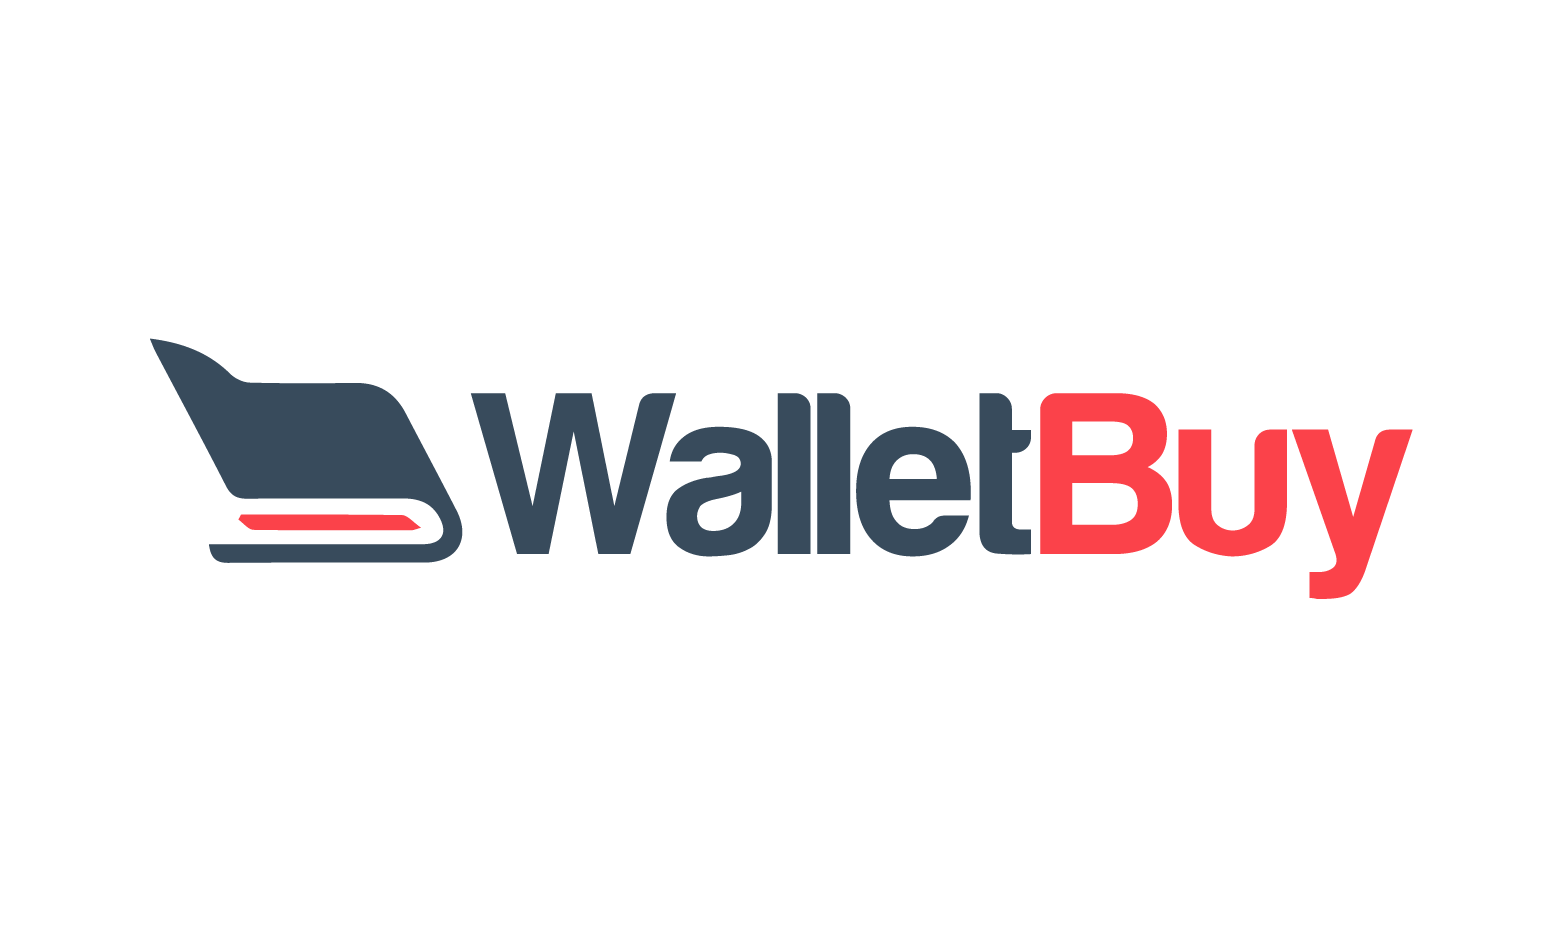 WalletBuy.com - Creative brandable domain for sale